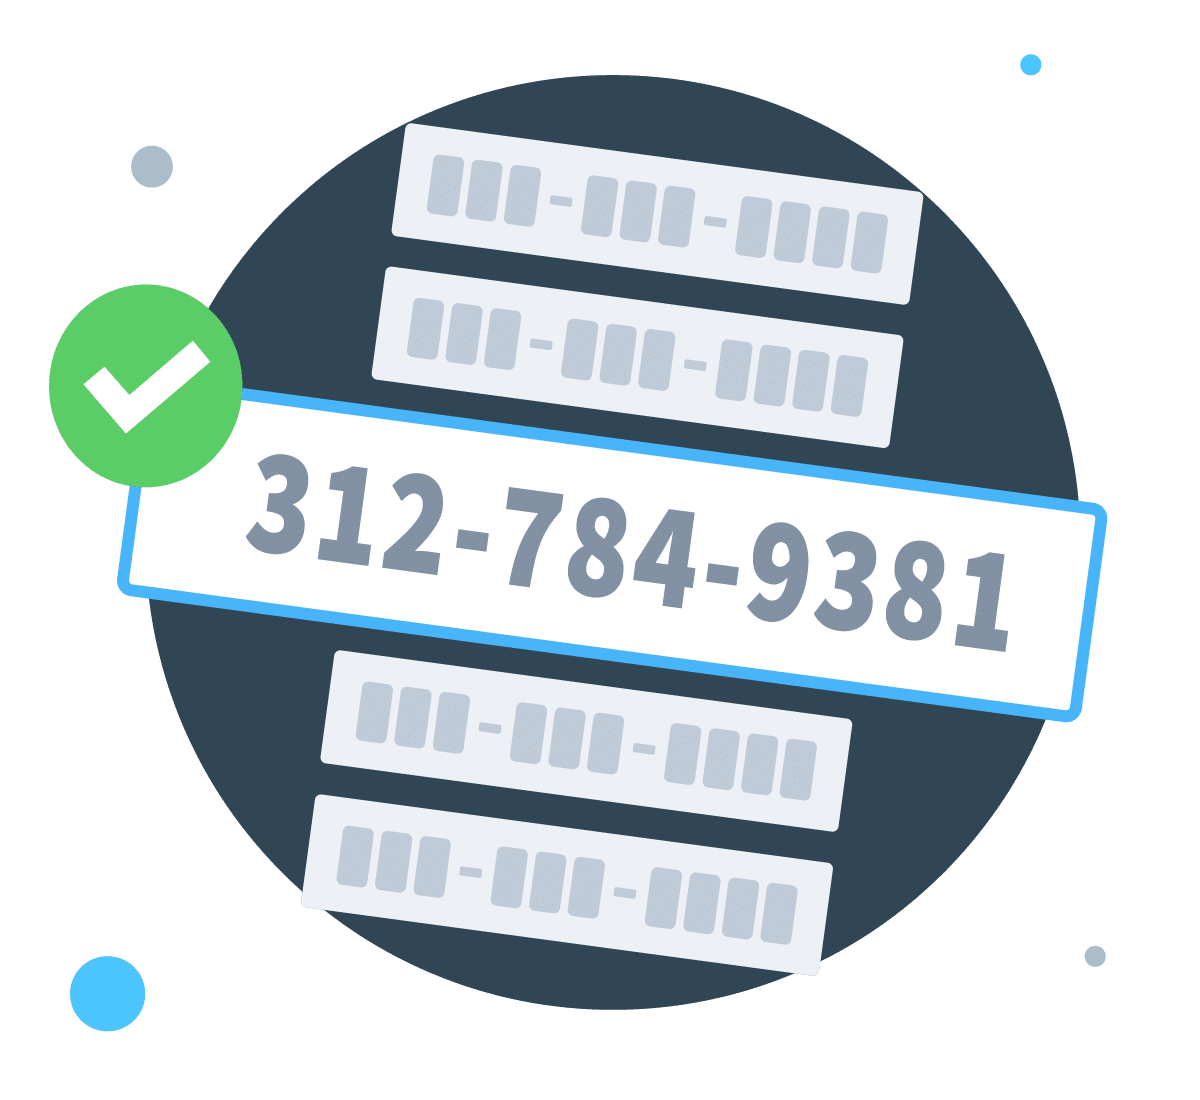 Cheapest Virtual Phone Number for Business